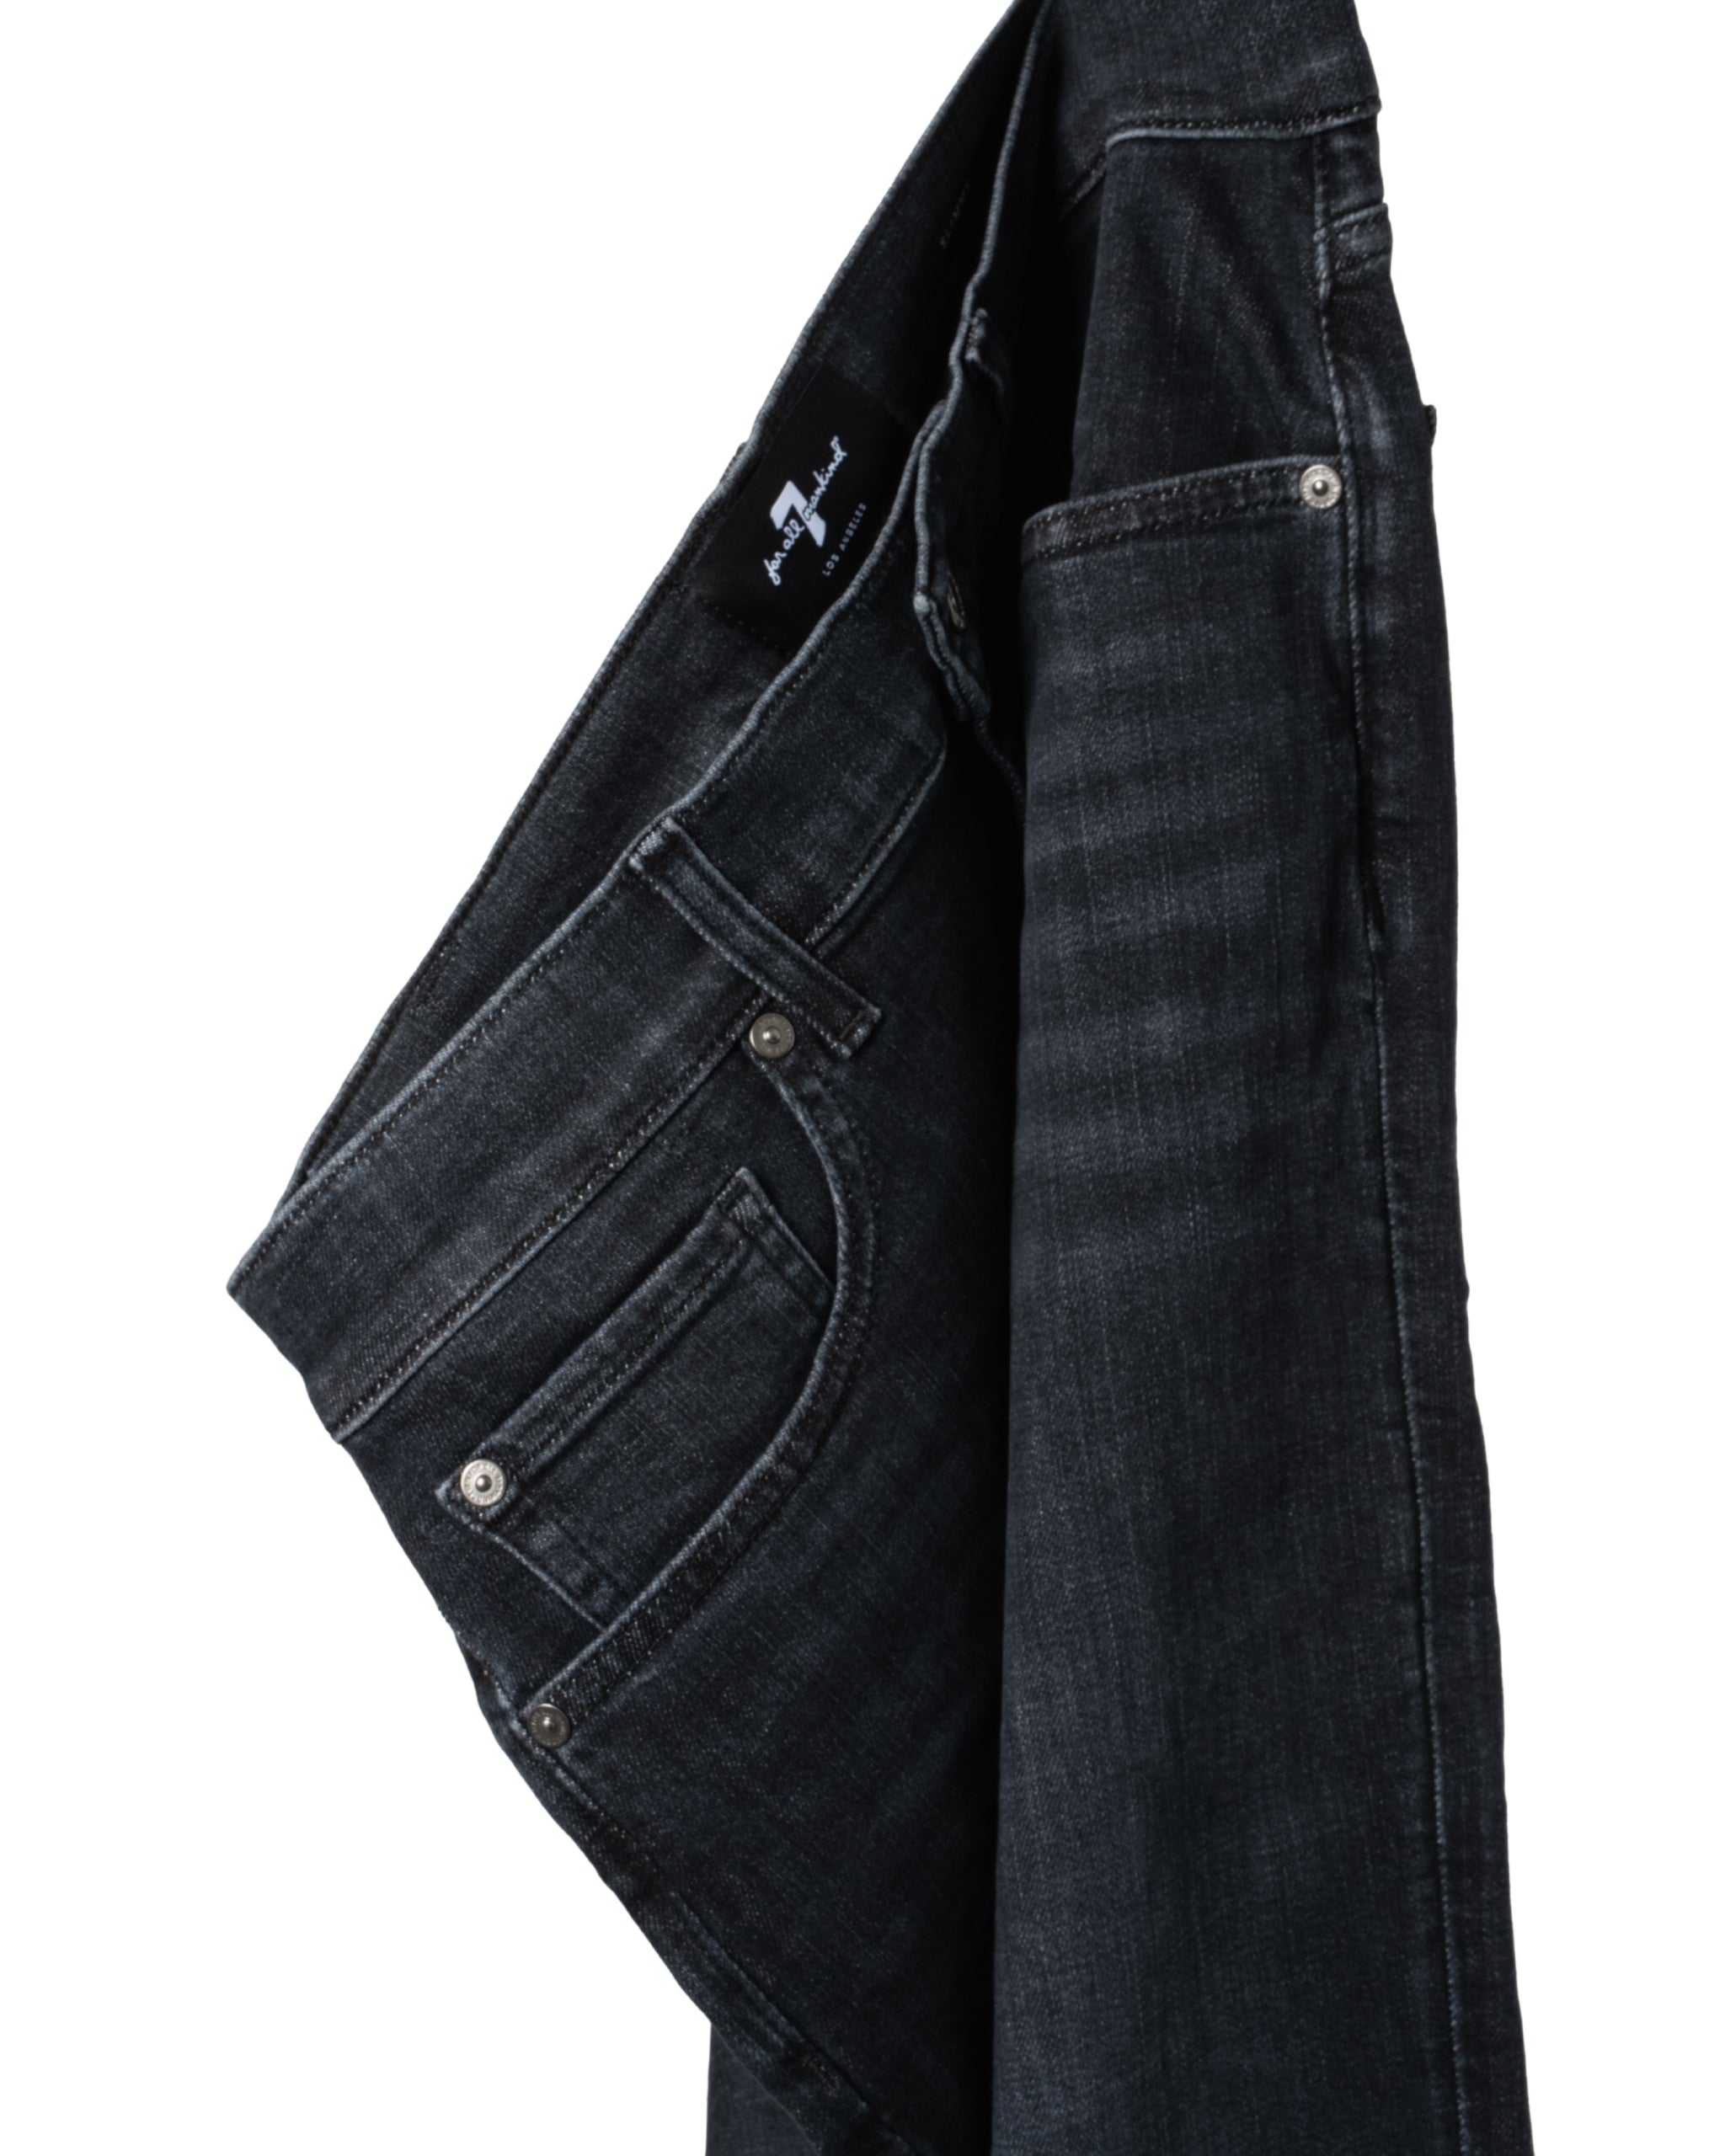 SLIMMY FIT JEANS